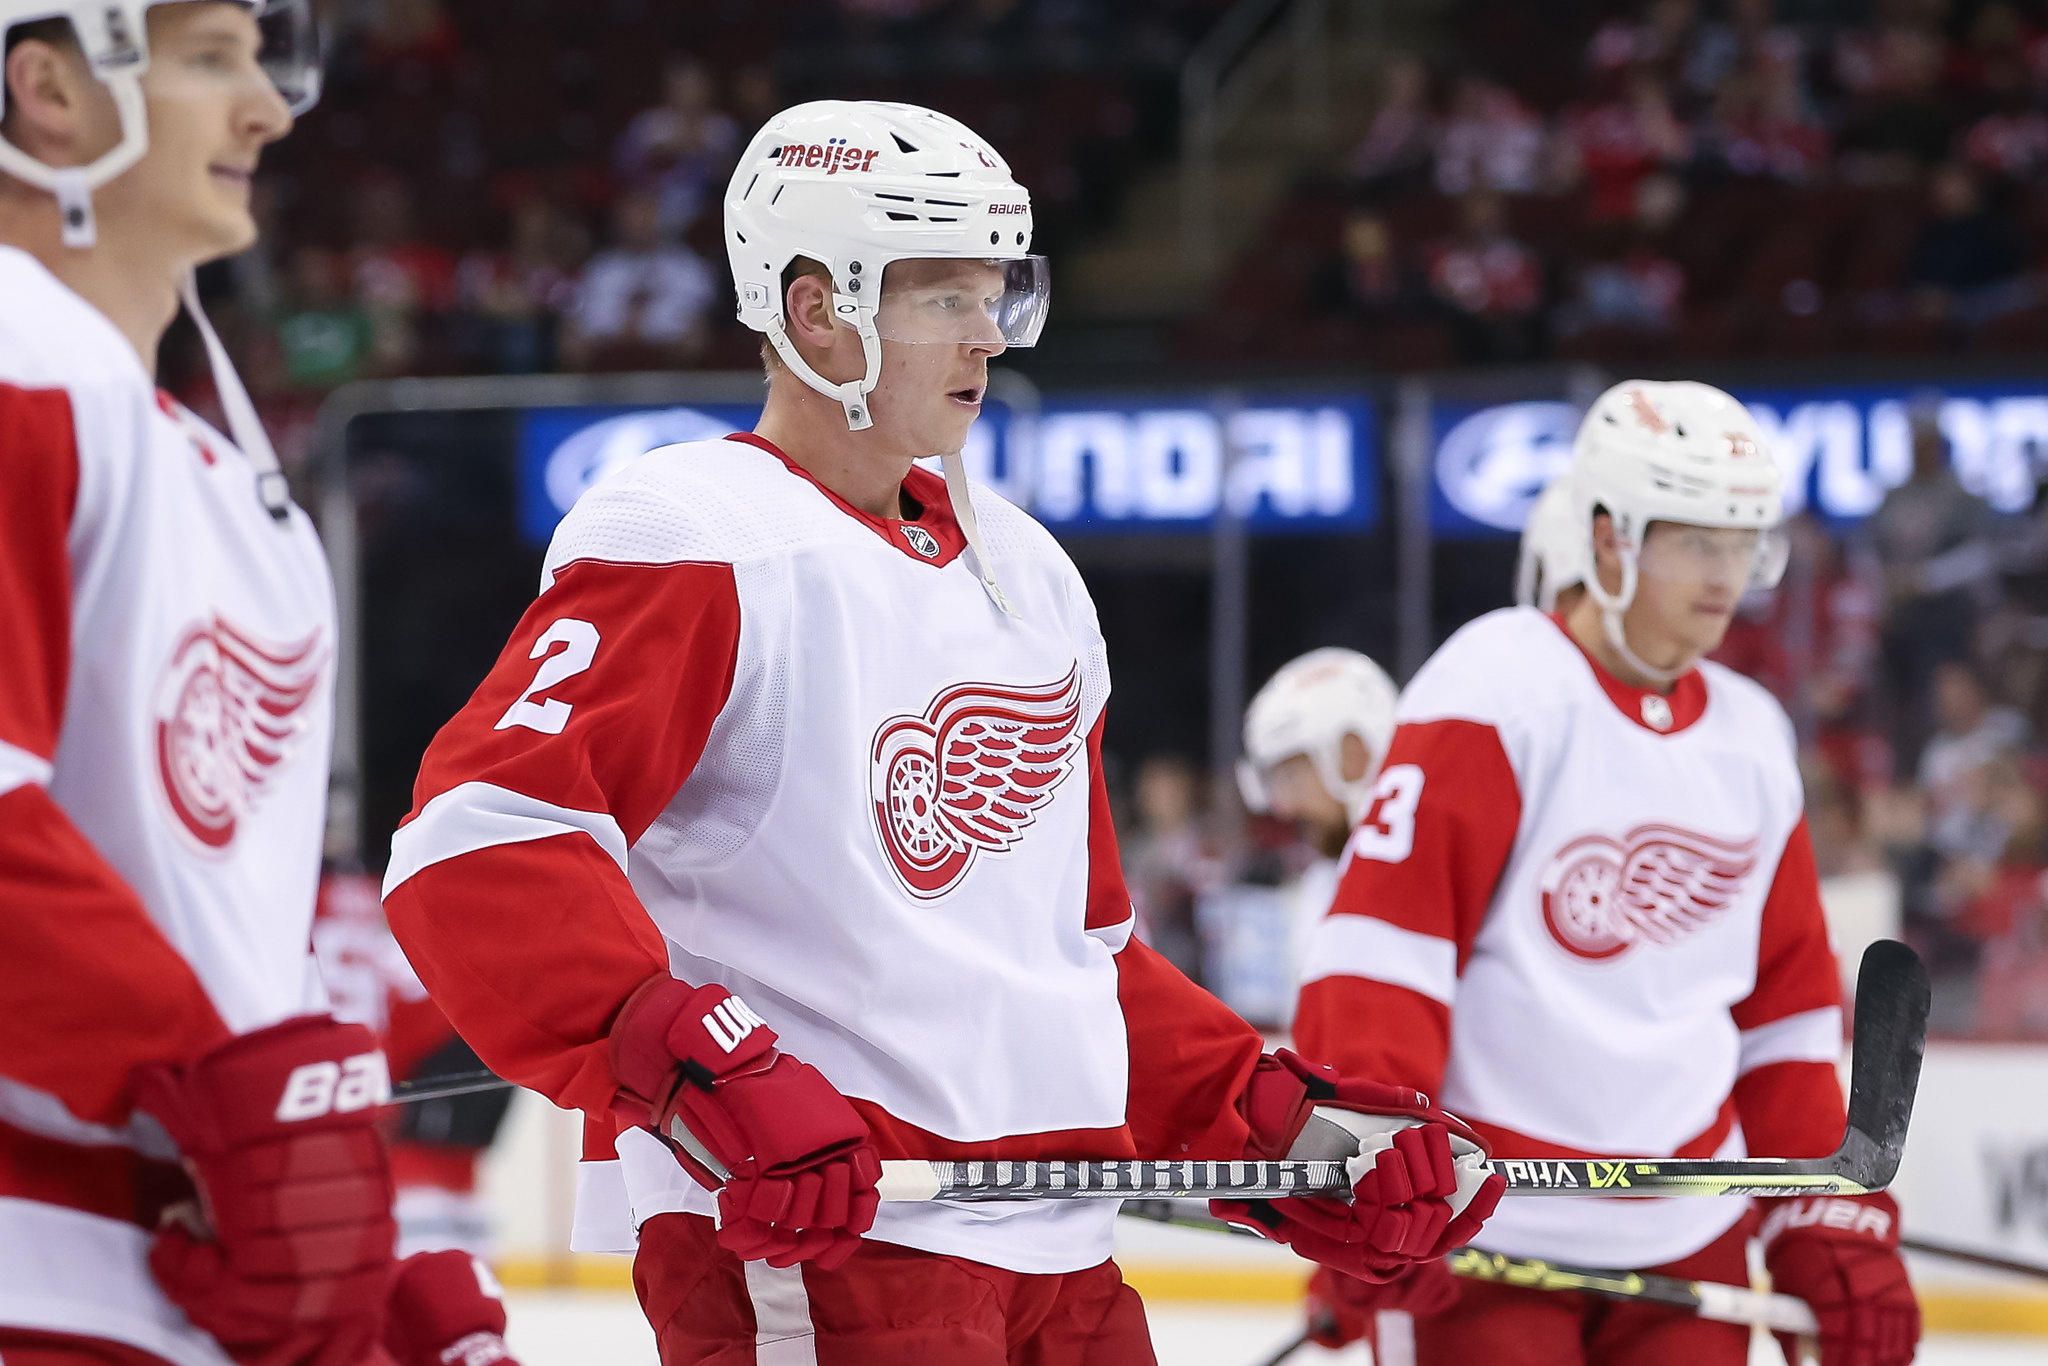 Lucas Raymond securing his spot in Red Wings' lineup, rookie history